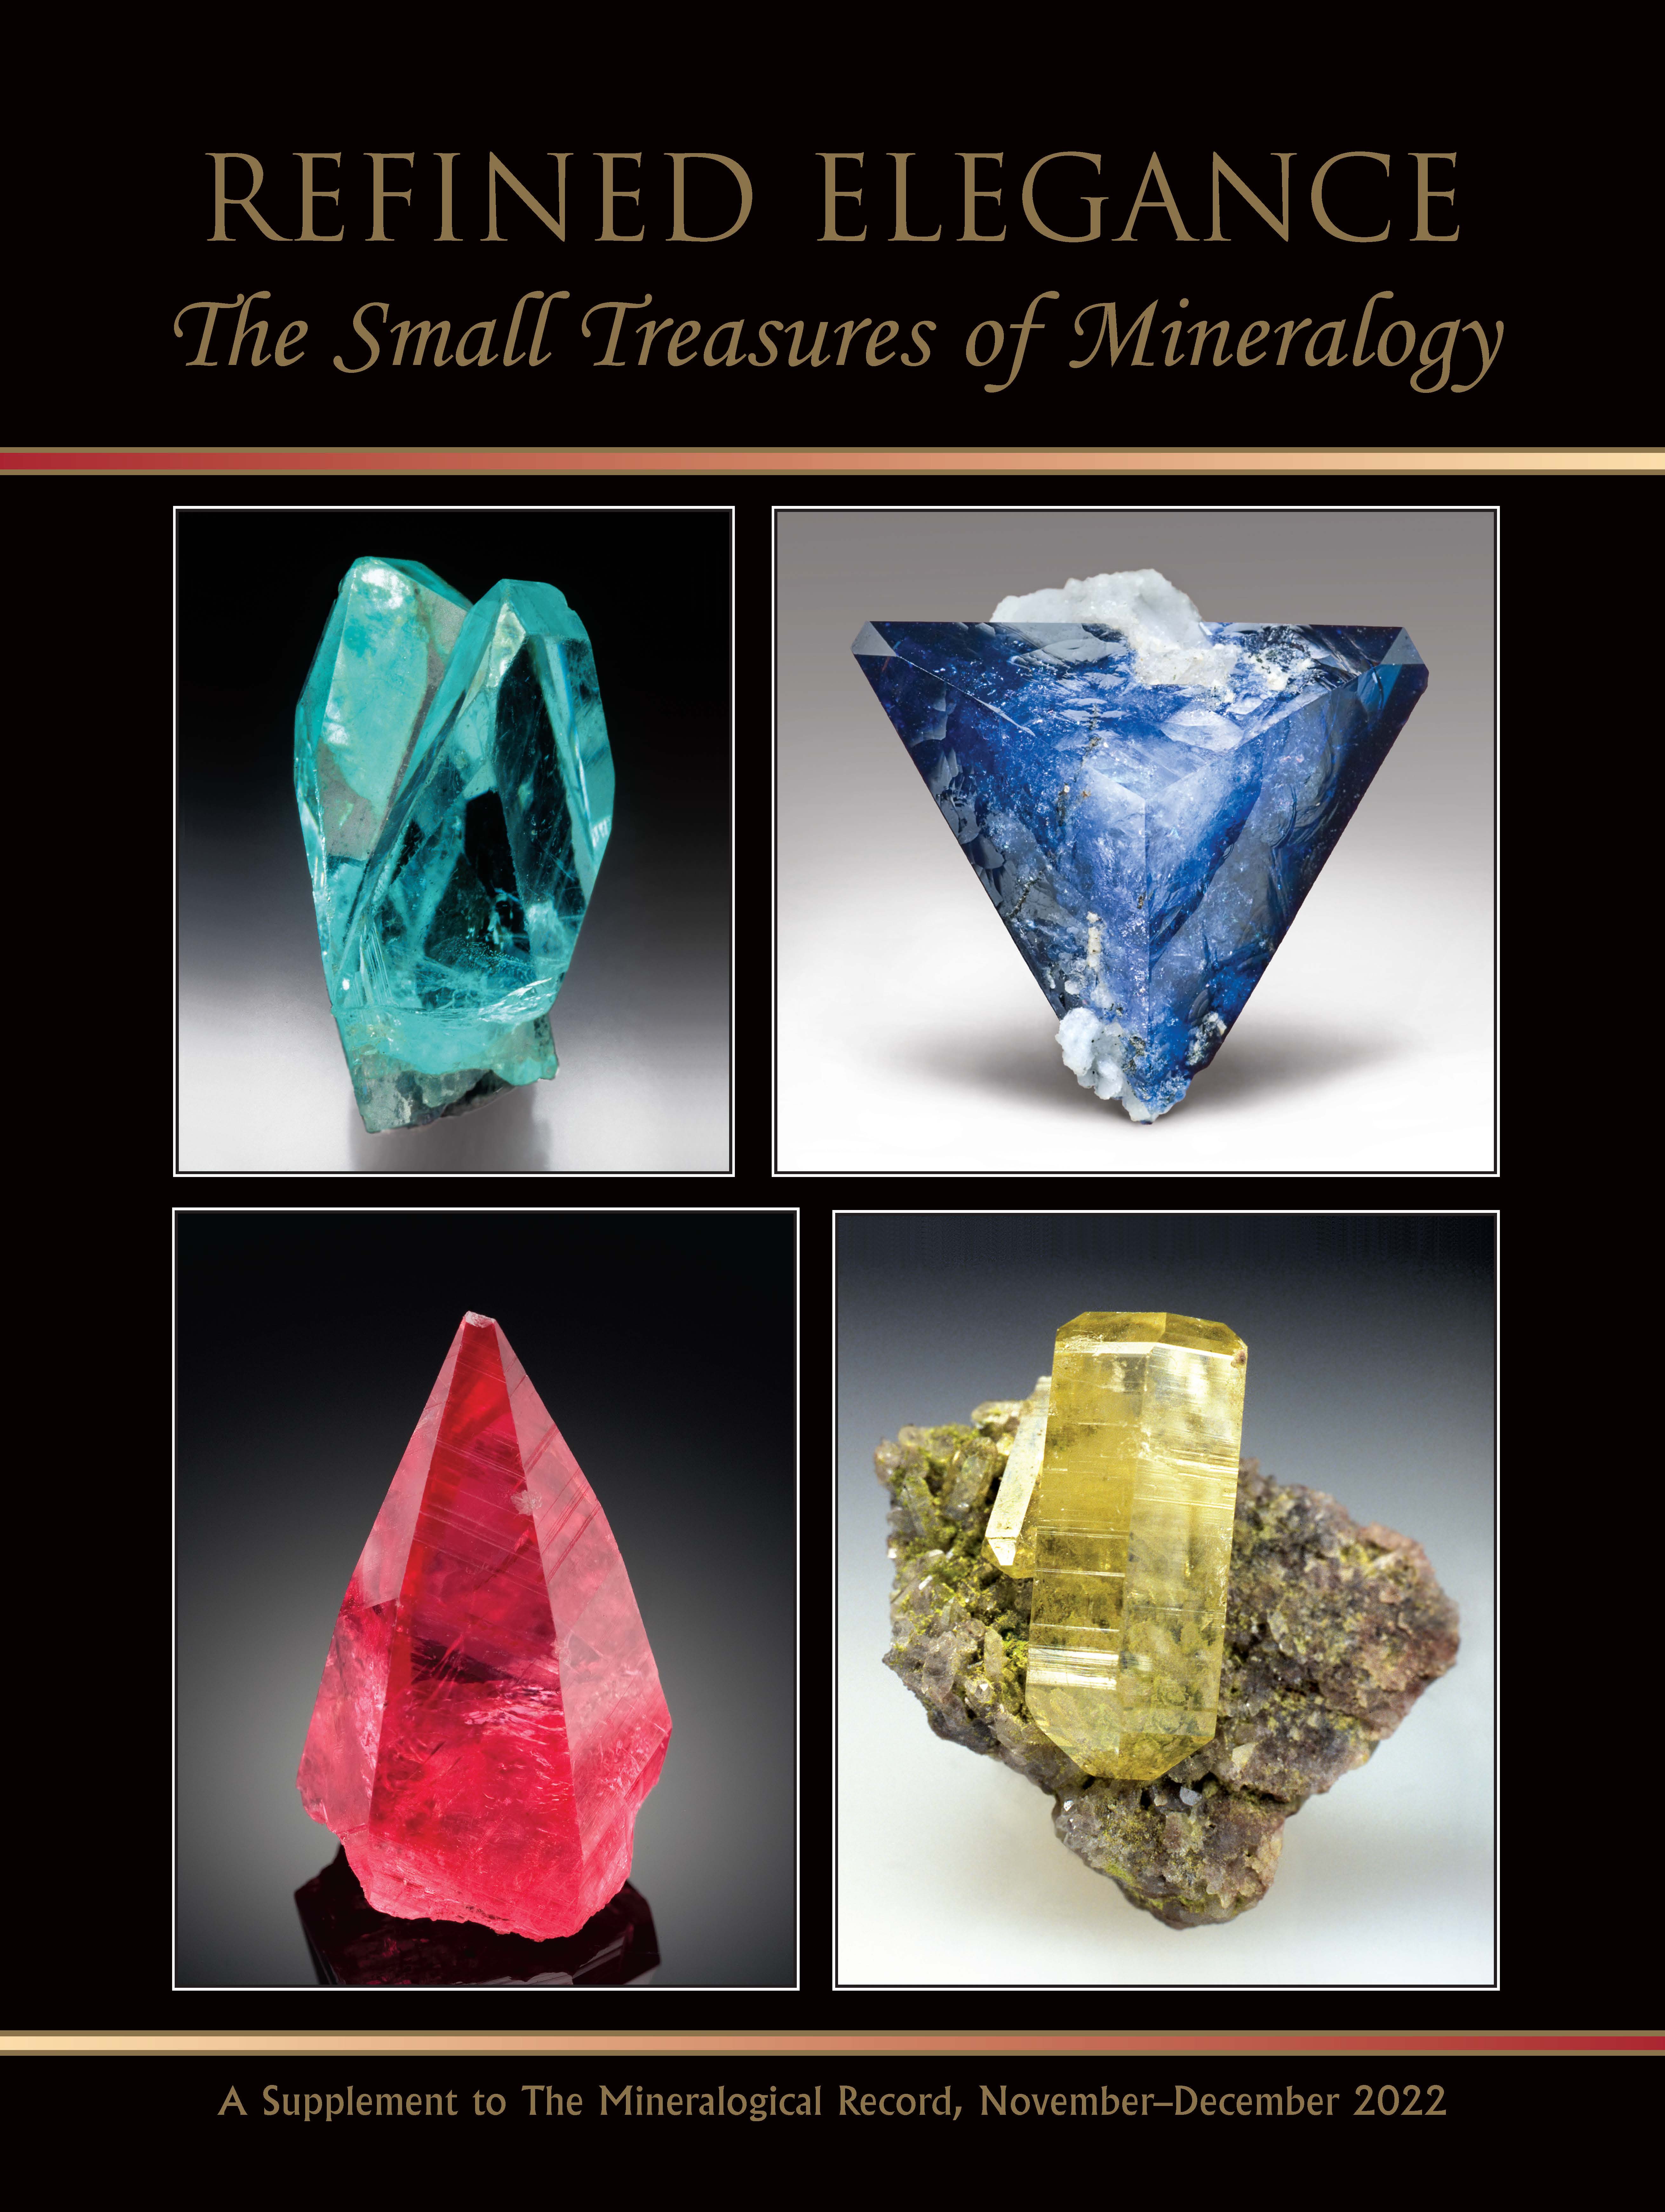 Refined Elegance: The Small Treasures of Mineralogy